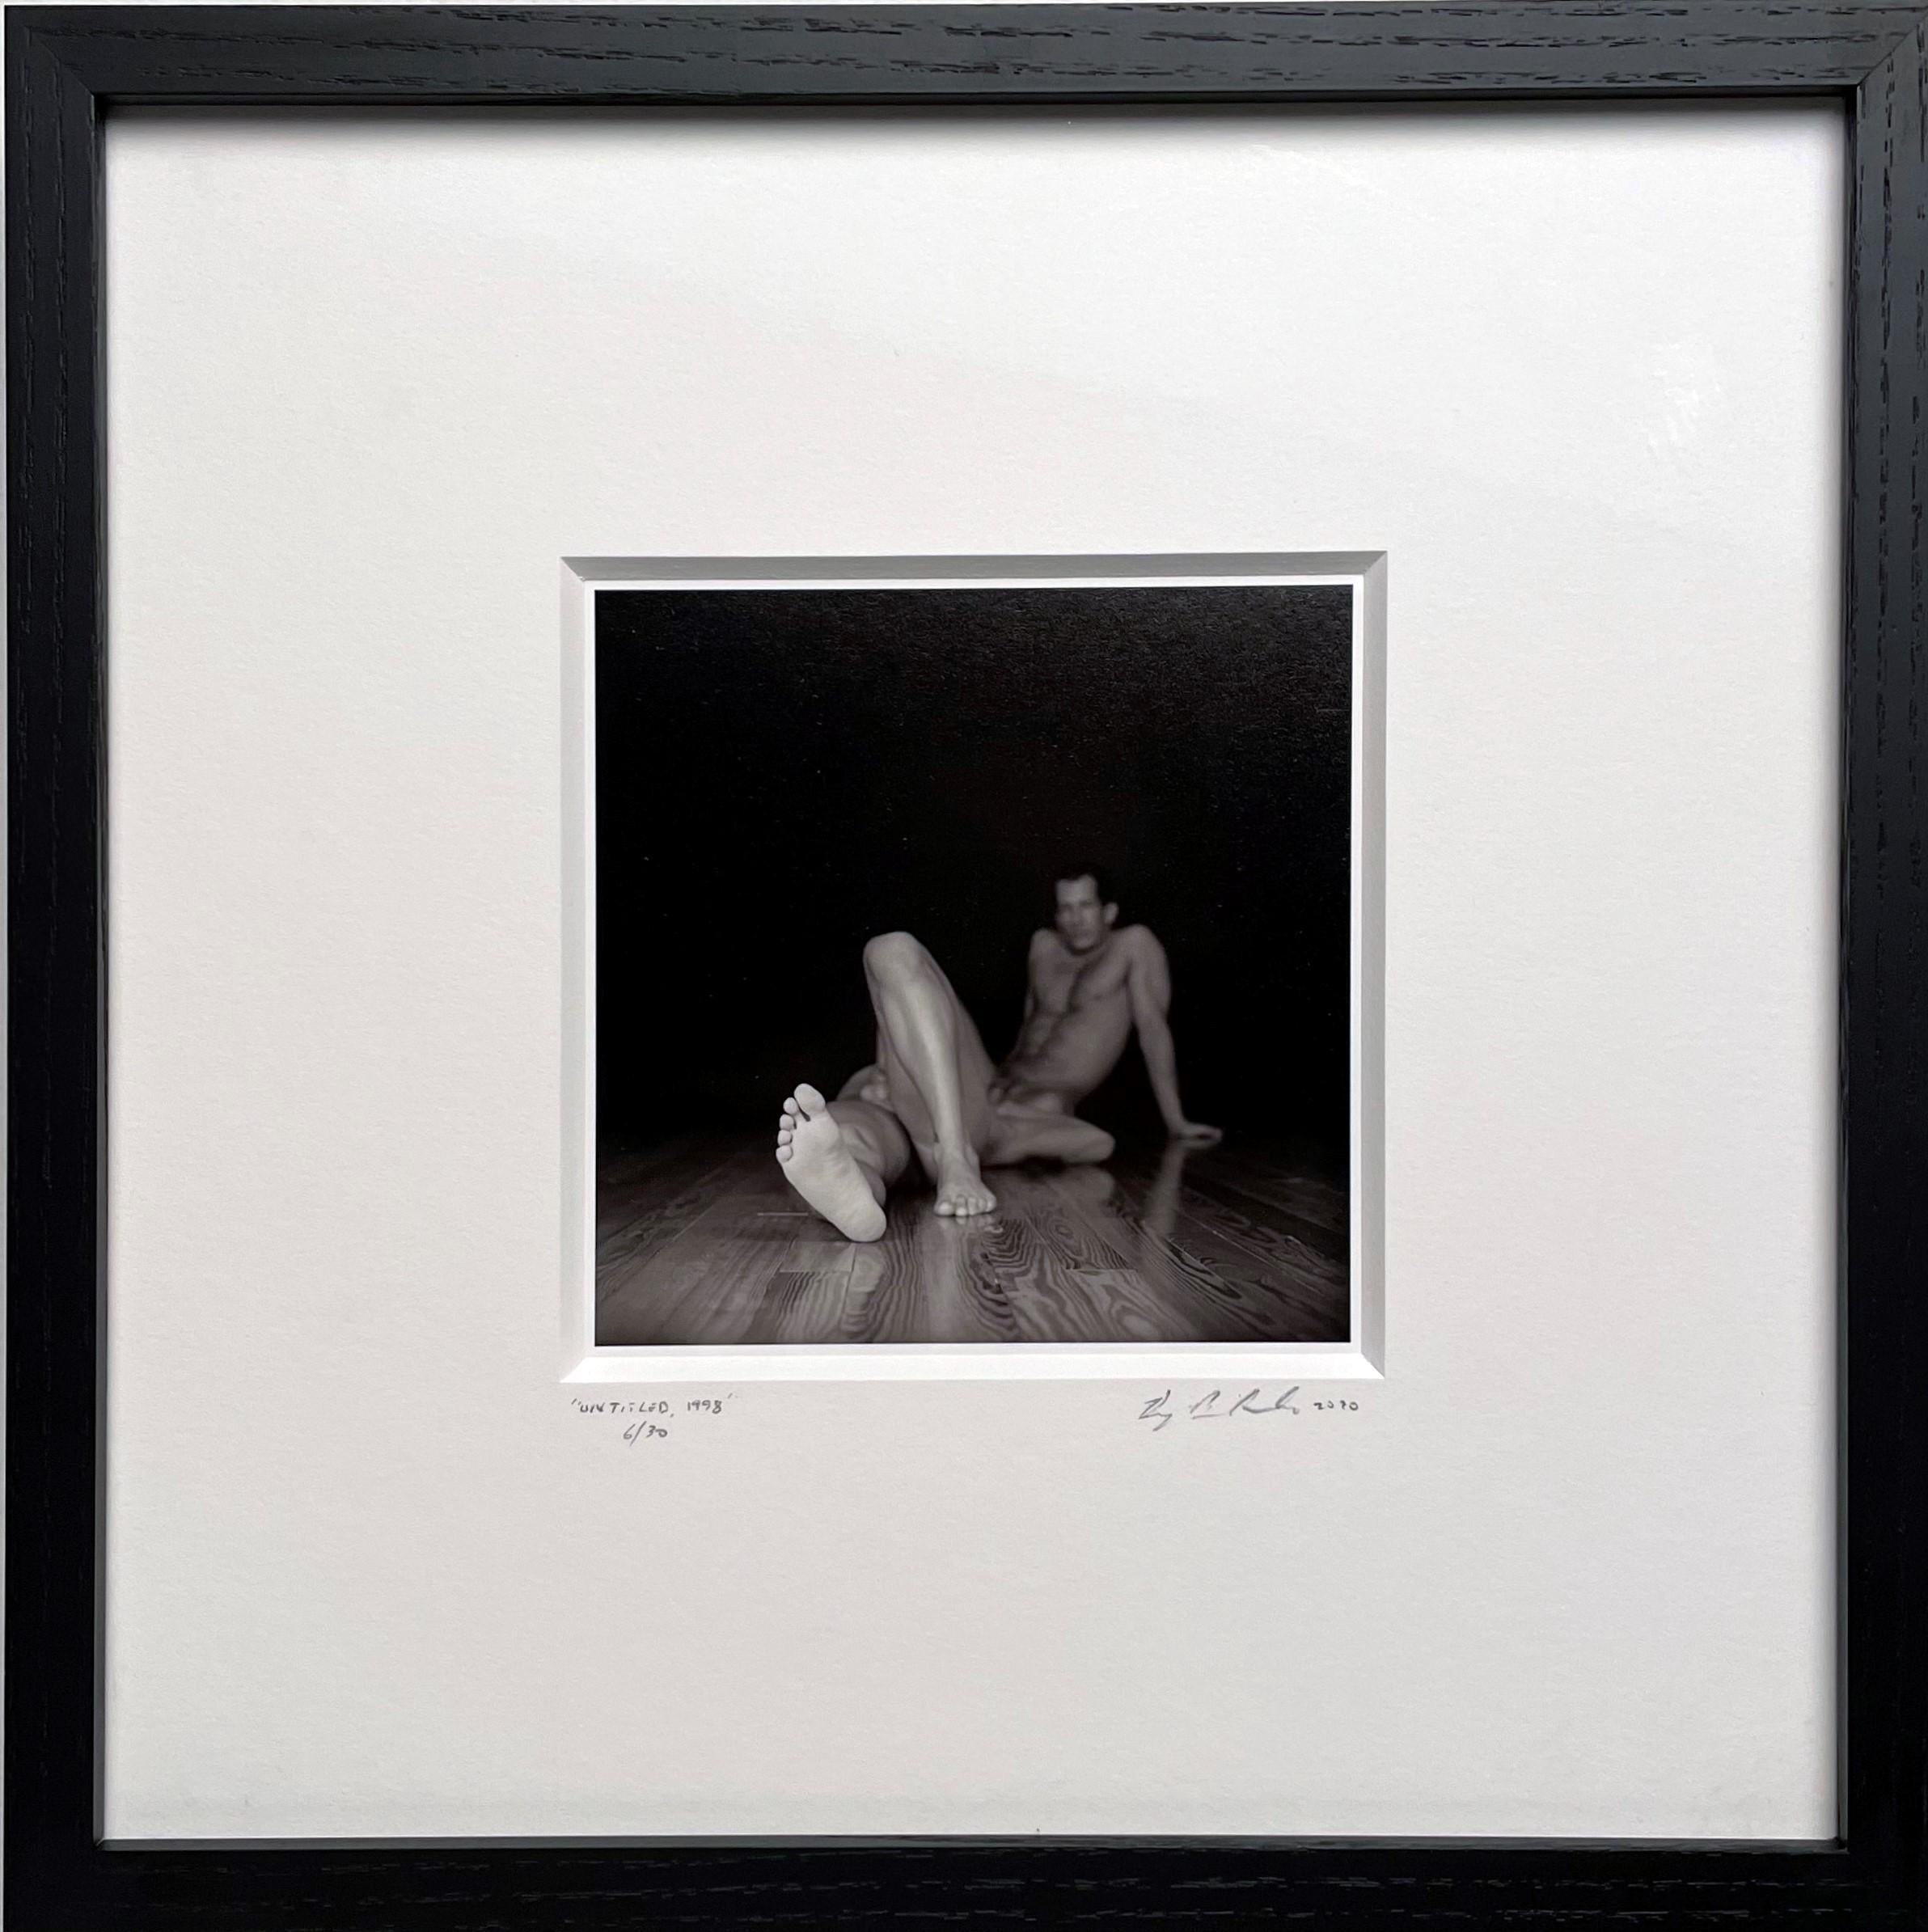 Two nude males lie on a bare wood floor.  The angle of the photograph suggests that their bodies have melded into one.  The artist uses traditional photography methods shooting the image on film.  The image is printed using traditional darkroom